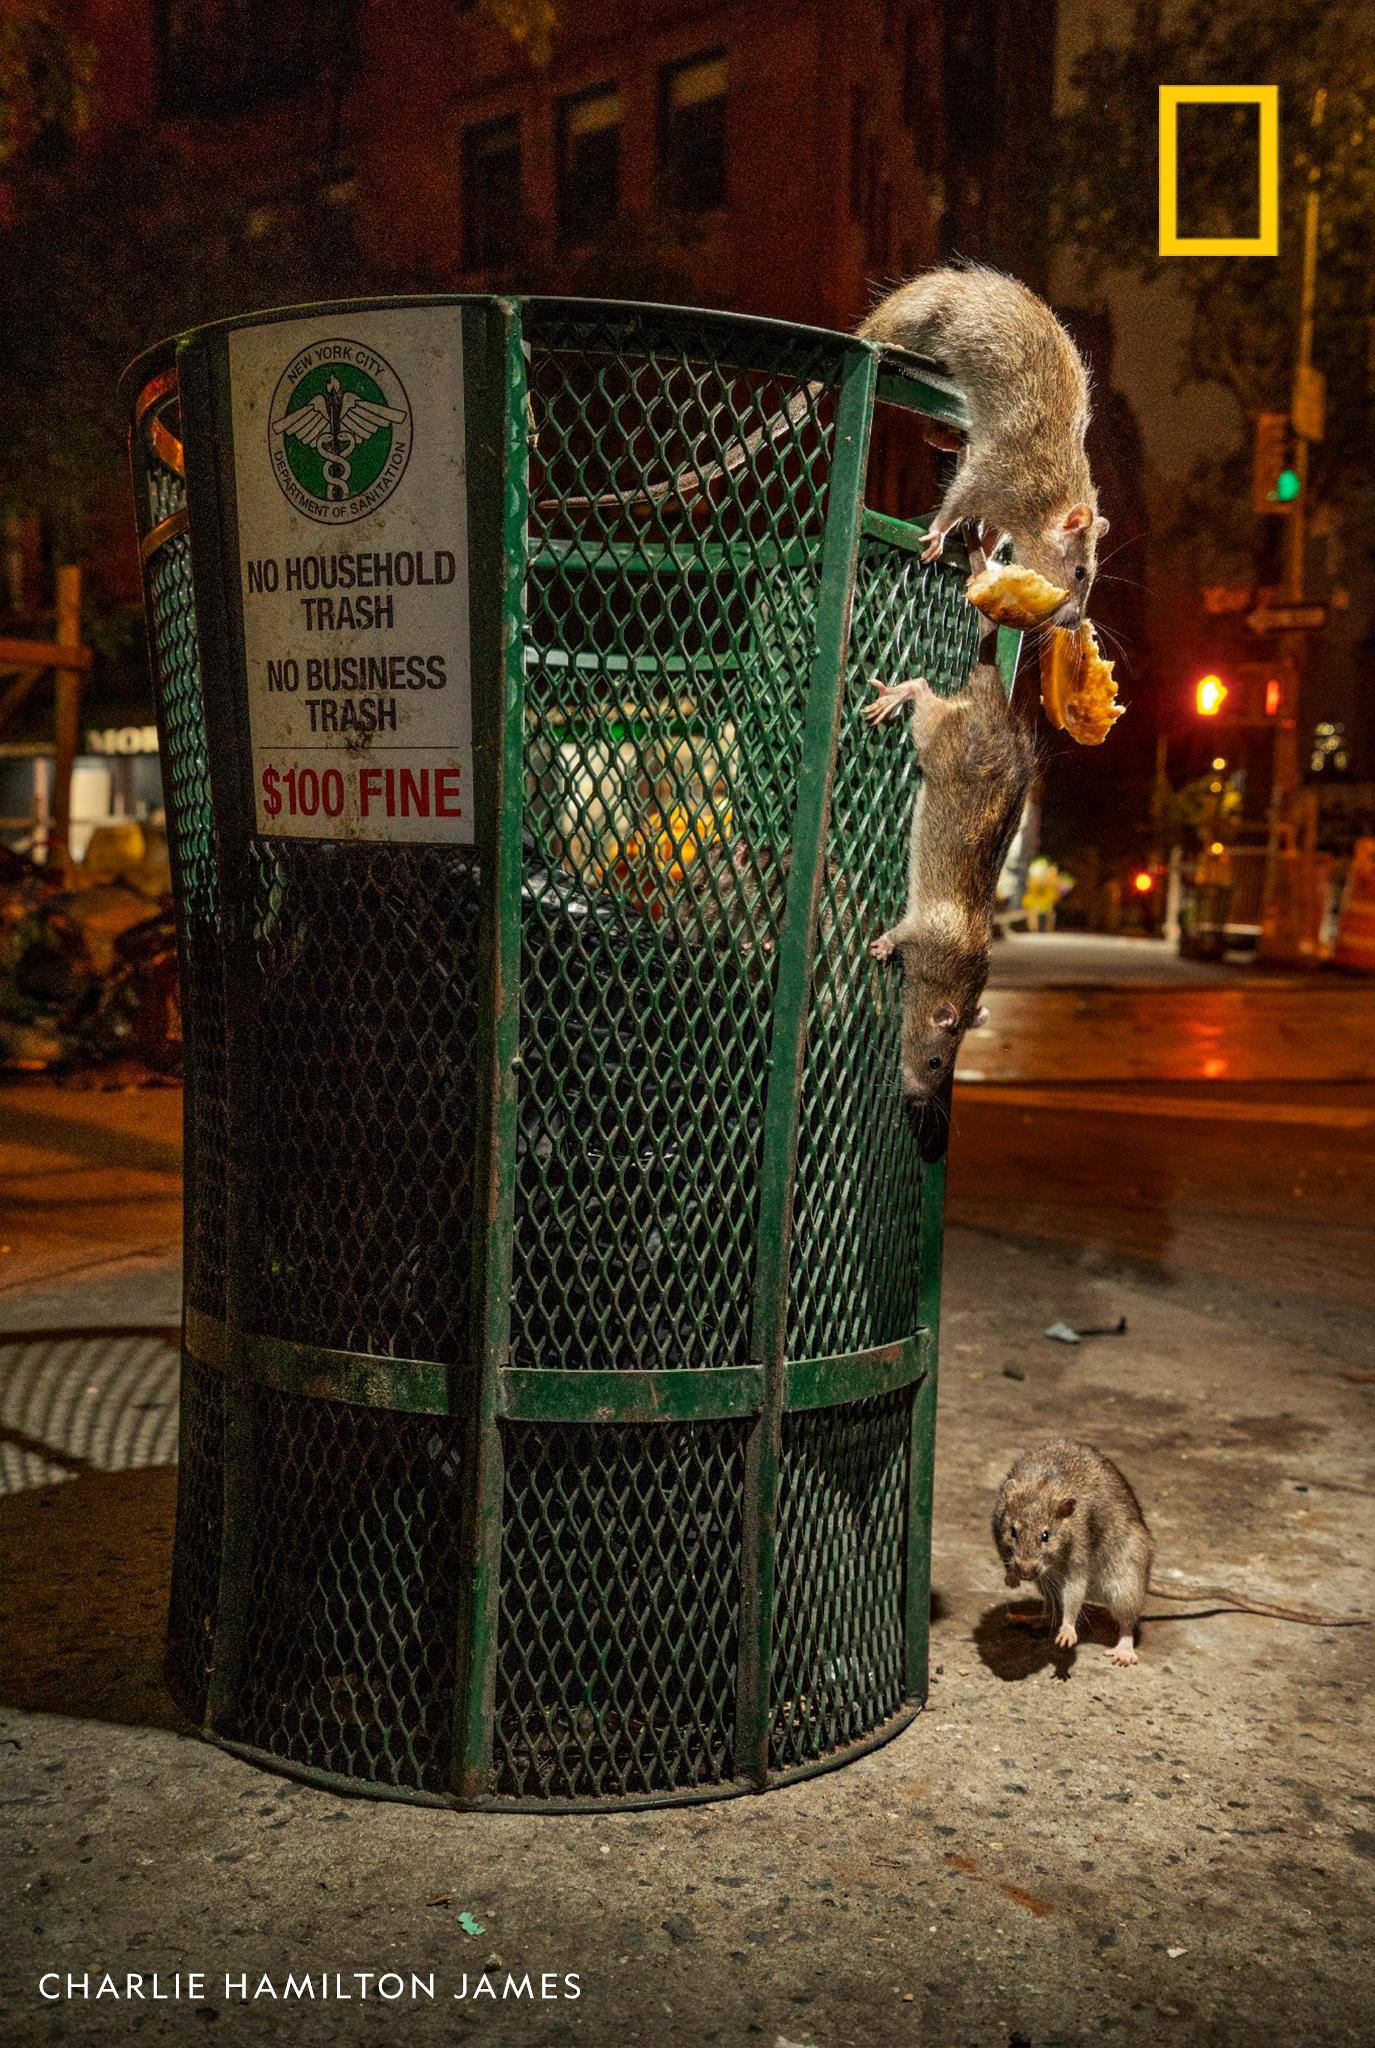 Rats have adapted over the millennia to survive and thrive in human company, much to our amazement and disgust. Meet an urban rodentologist in our podcast "Overheard"—and maybe gain a new appreciation for these resilient creatures. https://on.natgeo.com/2Xxu9fZ